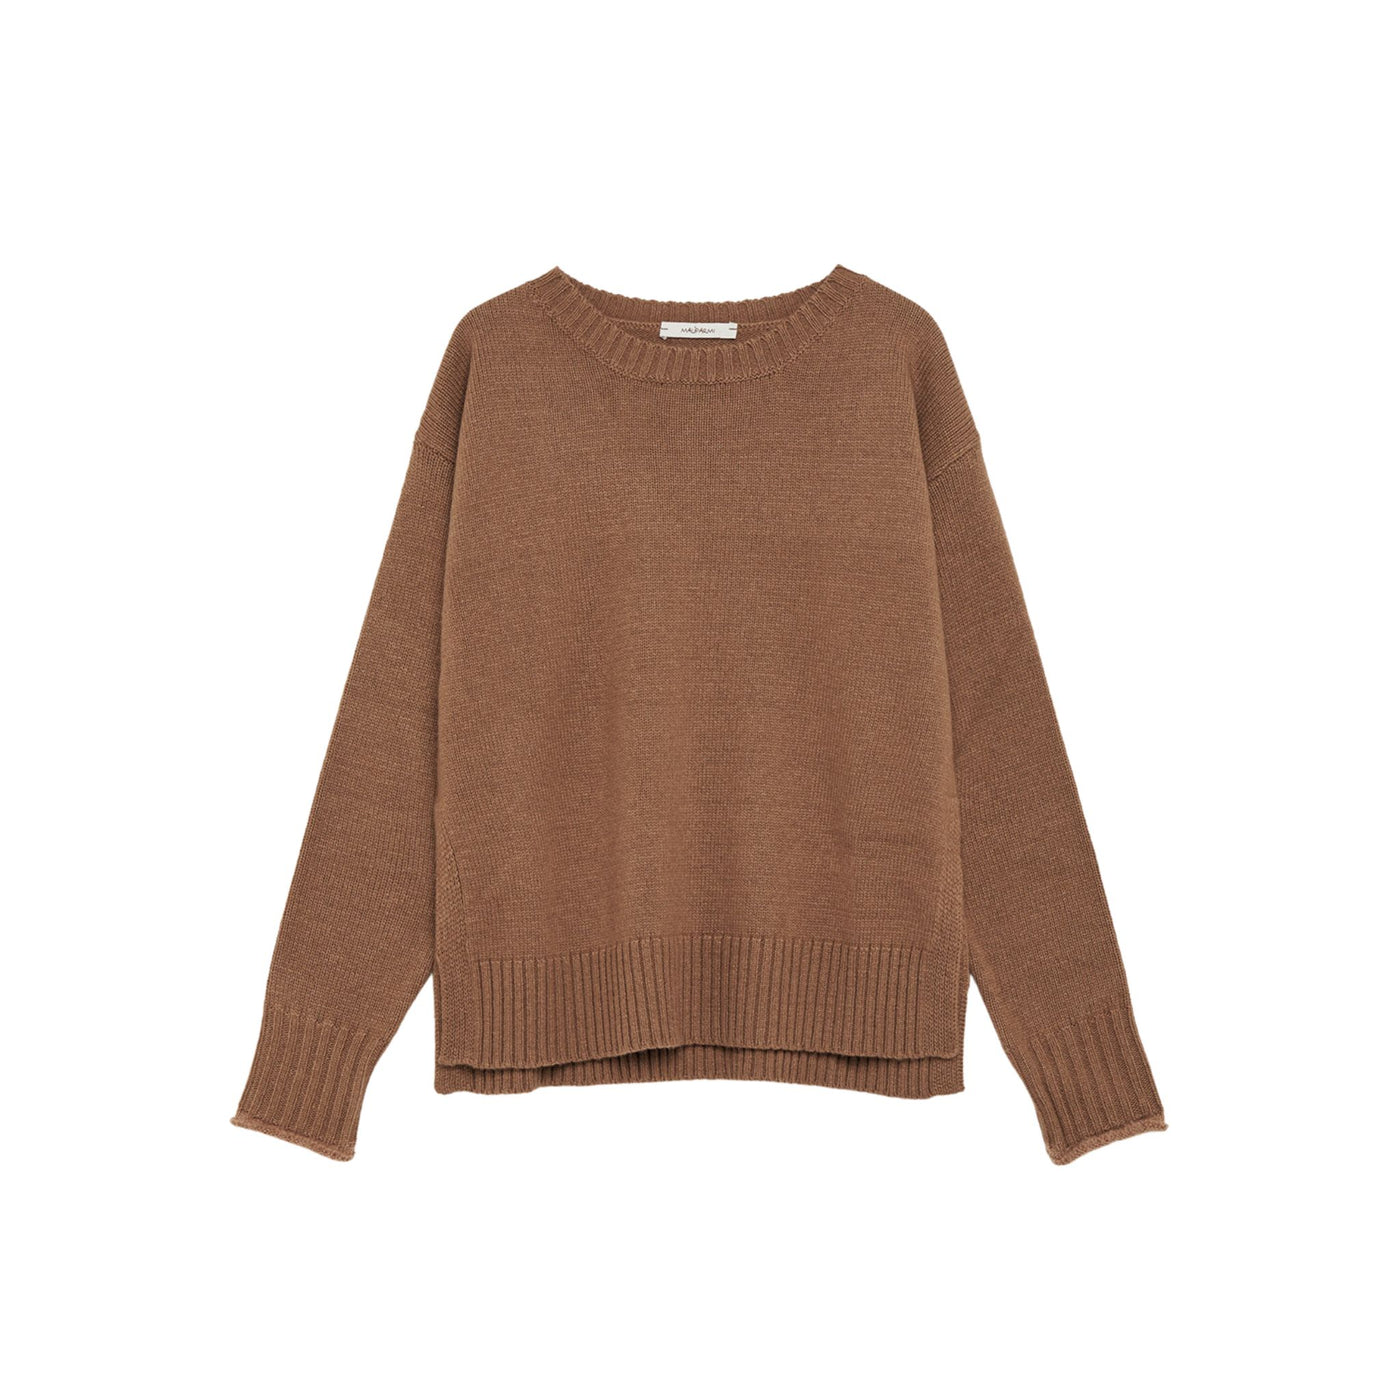 Women's sweater with ribbed hems